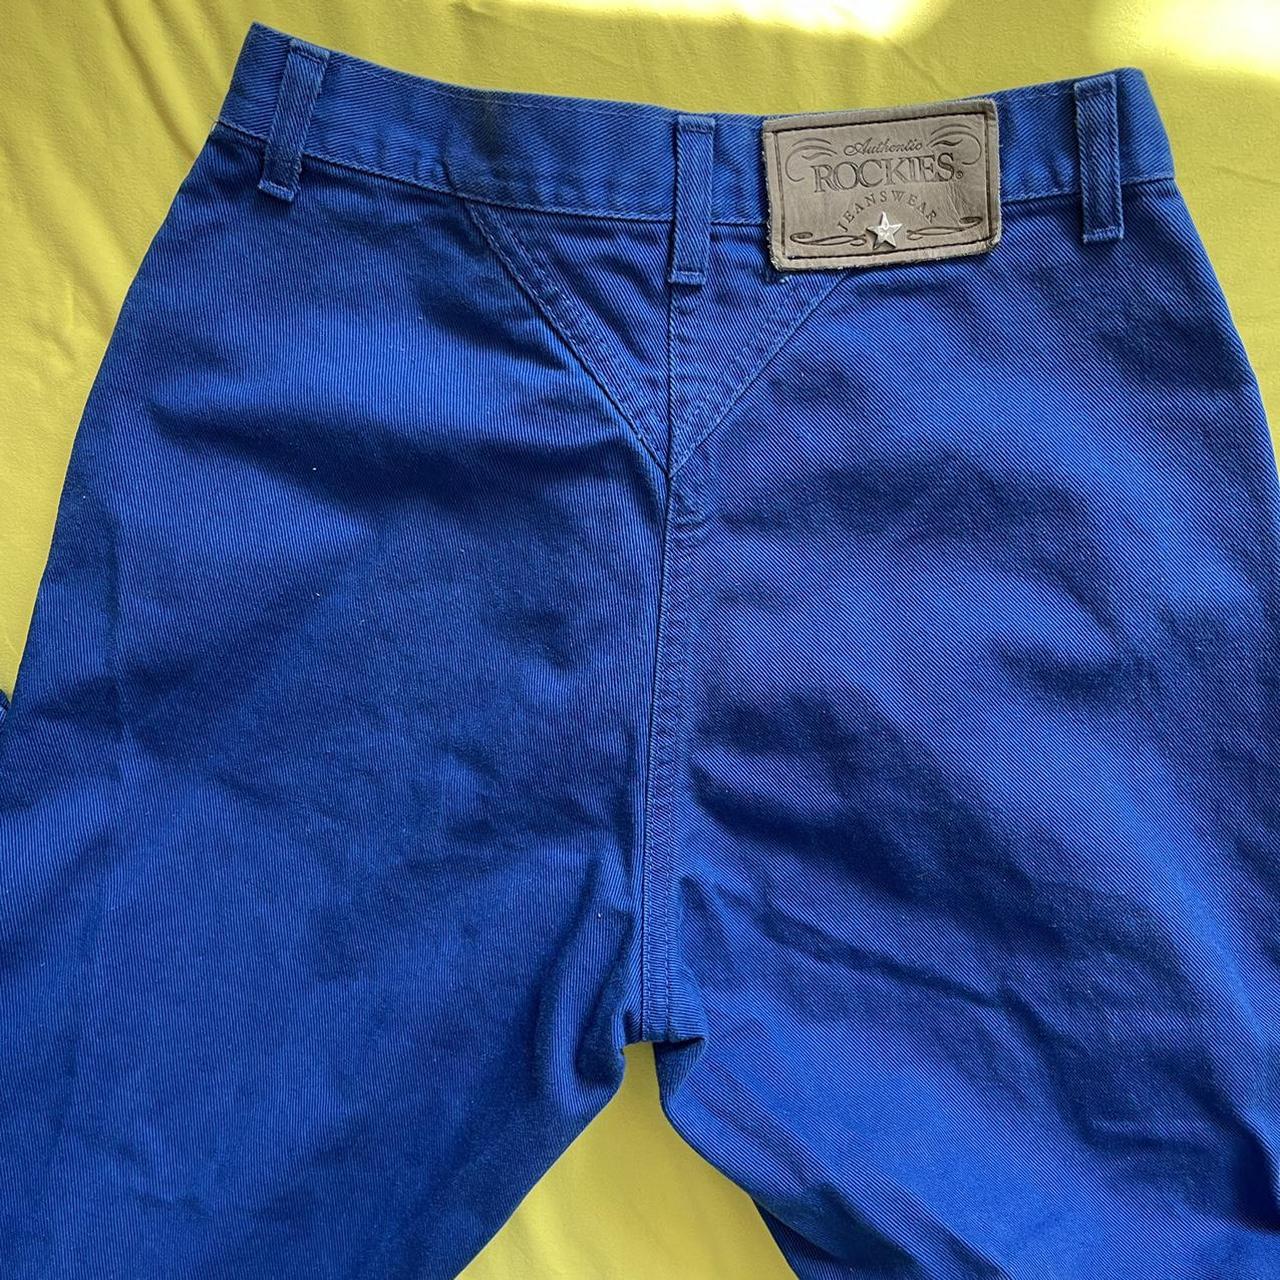 Product Image 2 - Vintage Authentic Rockies Jeanswear Blue